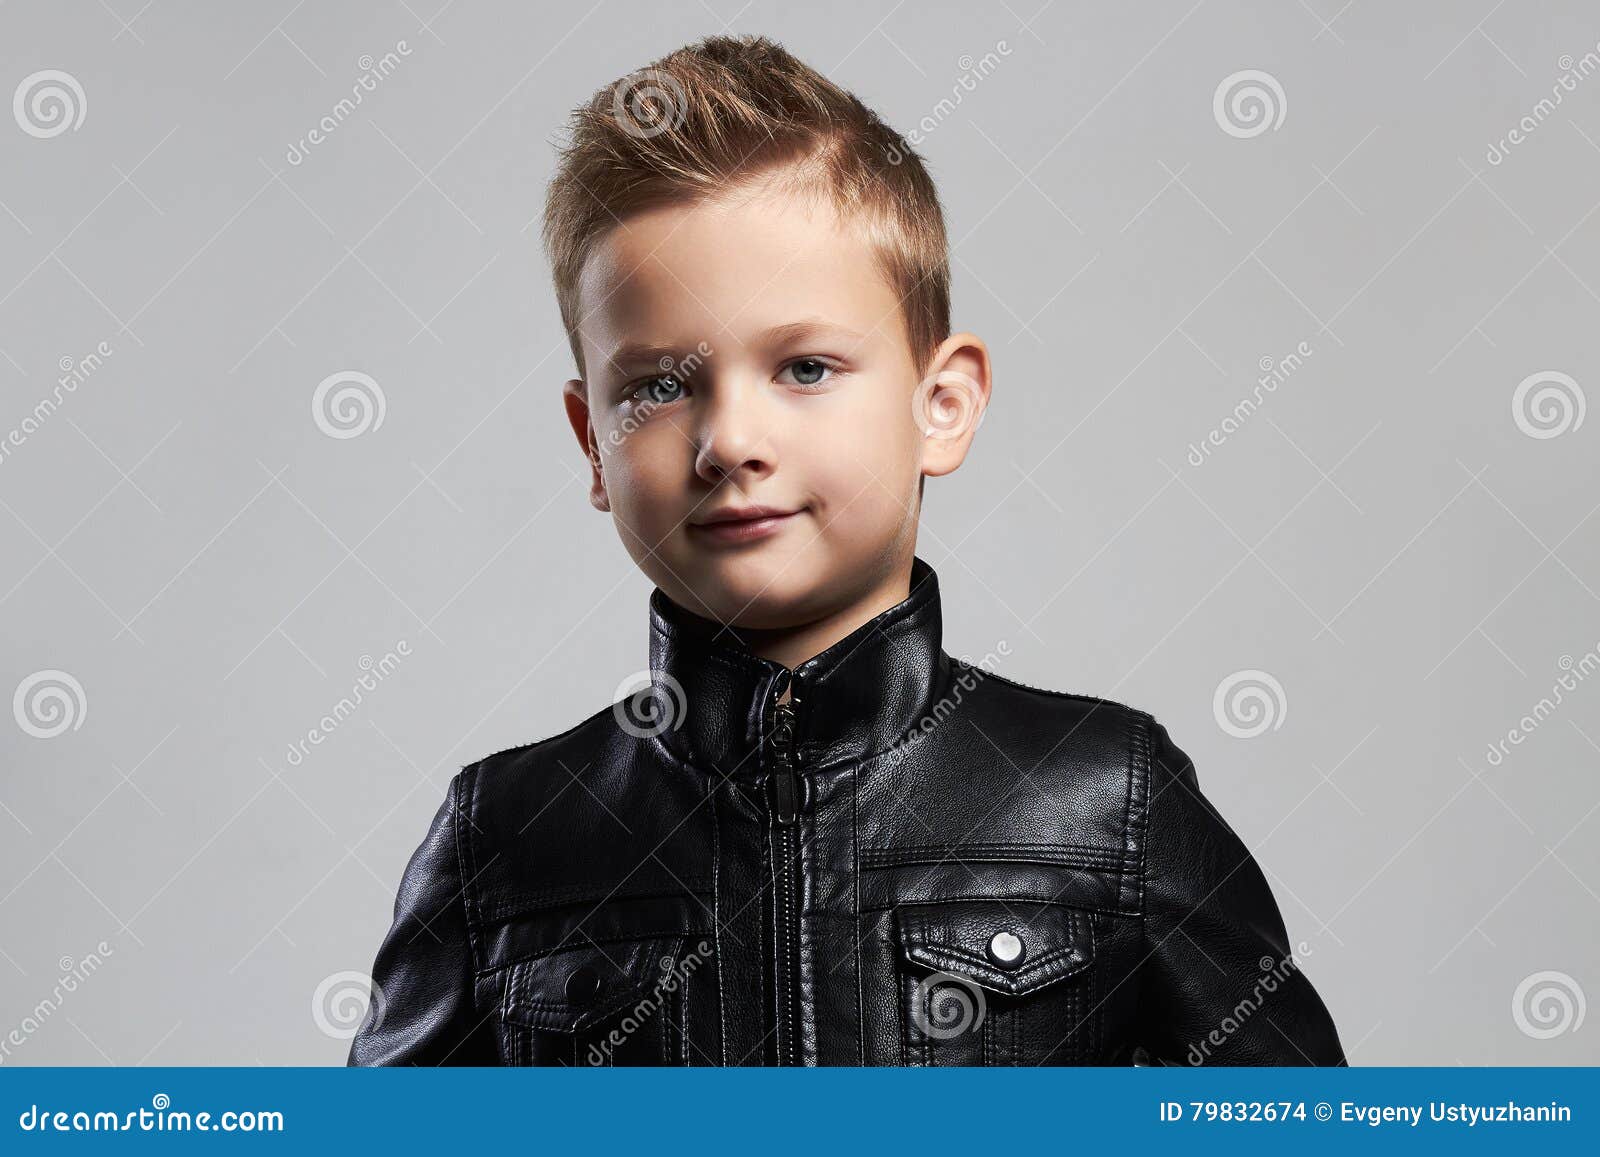 Fashionable Child In Leather Coat Stylish Child With Trendy